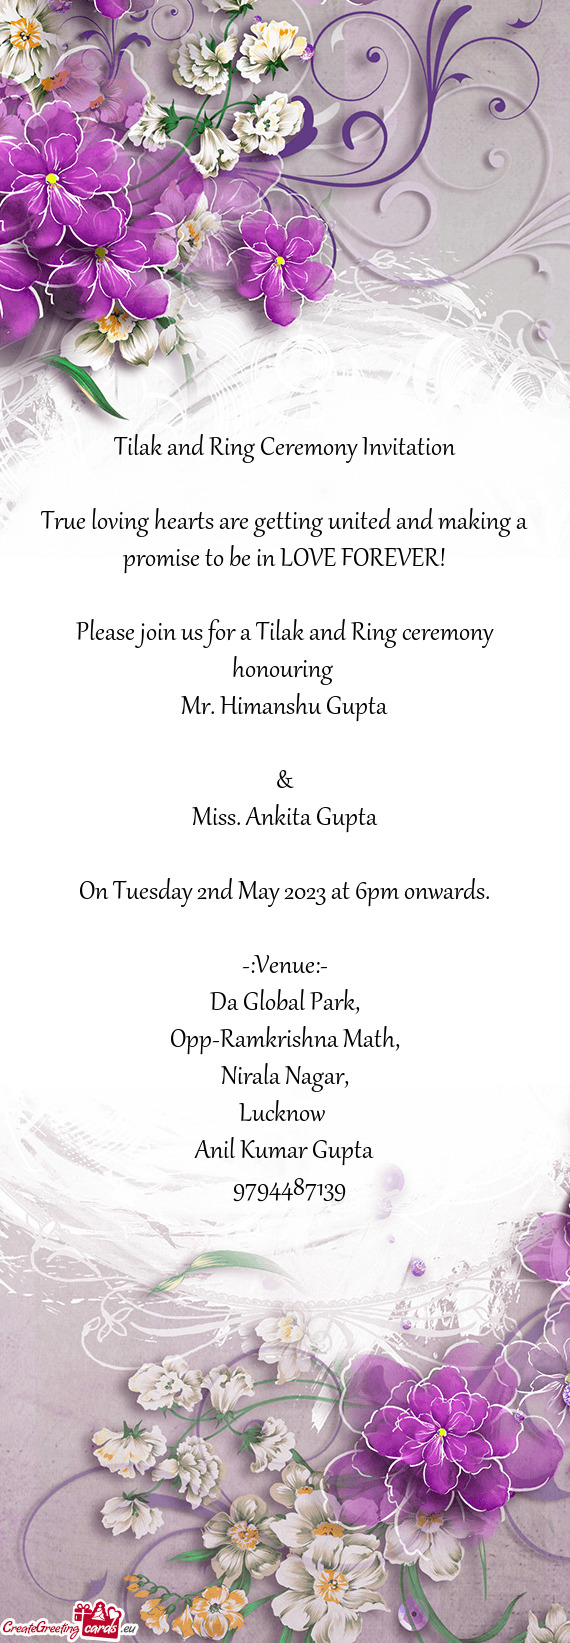 Please join us for a Tilak and Ring ceremony honouring